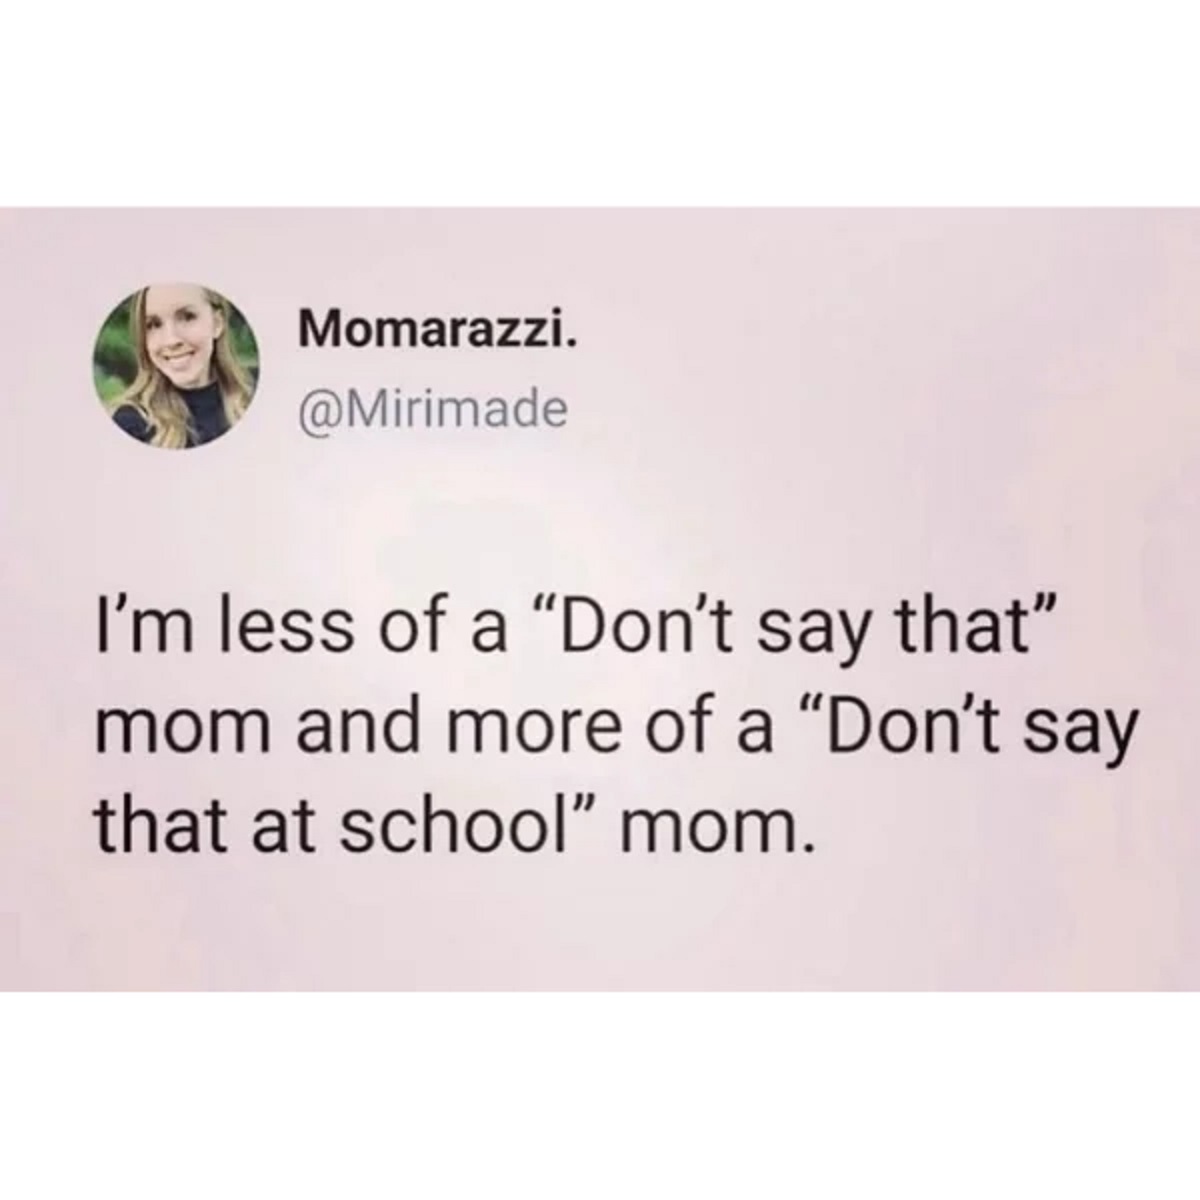 material - Momarazzi. I'm less of a "Don't say that" mom and more of a "Don't say that at school" mom.